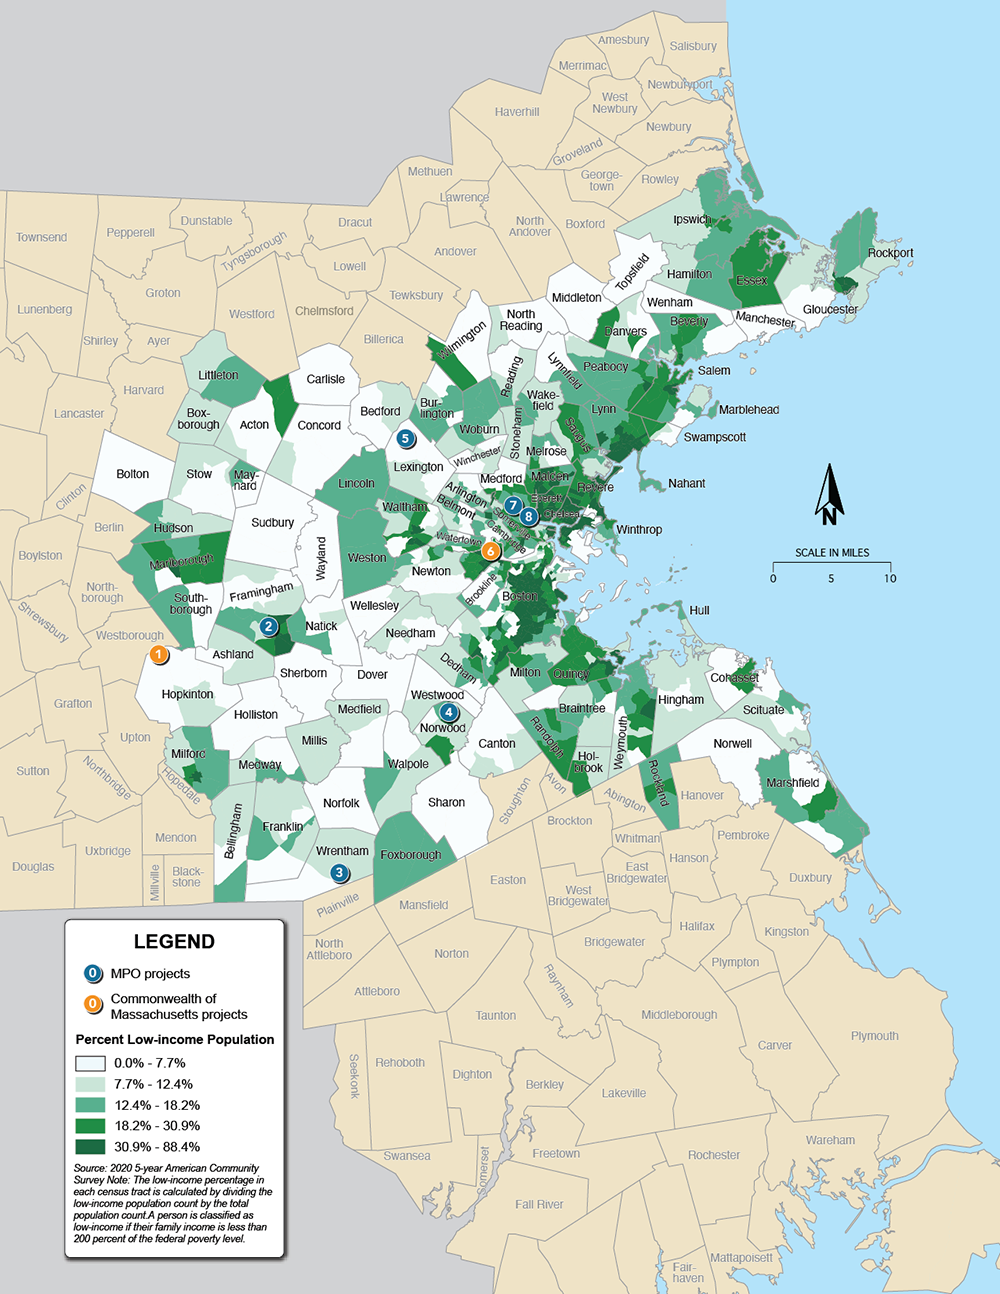 This figure is a map of the Boston region that displays the locations of Recommended Plan projects and census tracts shaded by their share of low-income population.